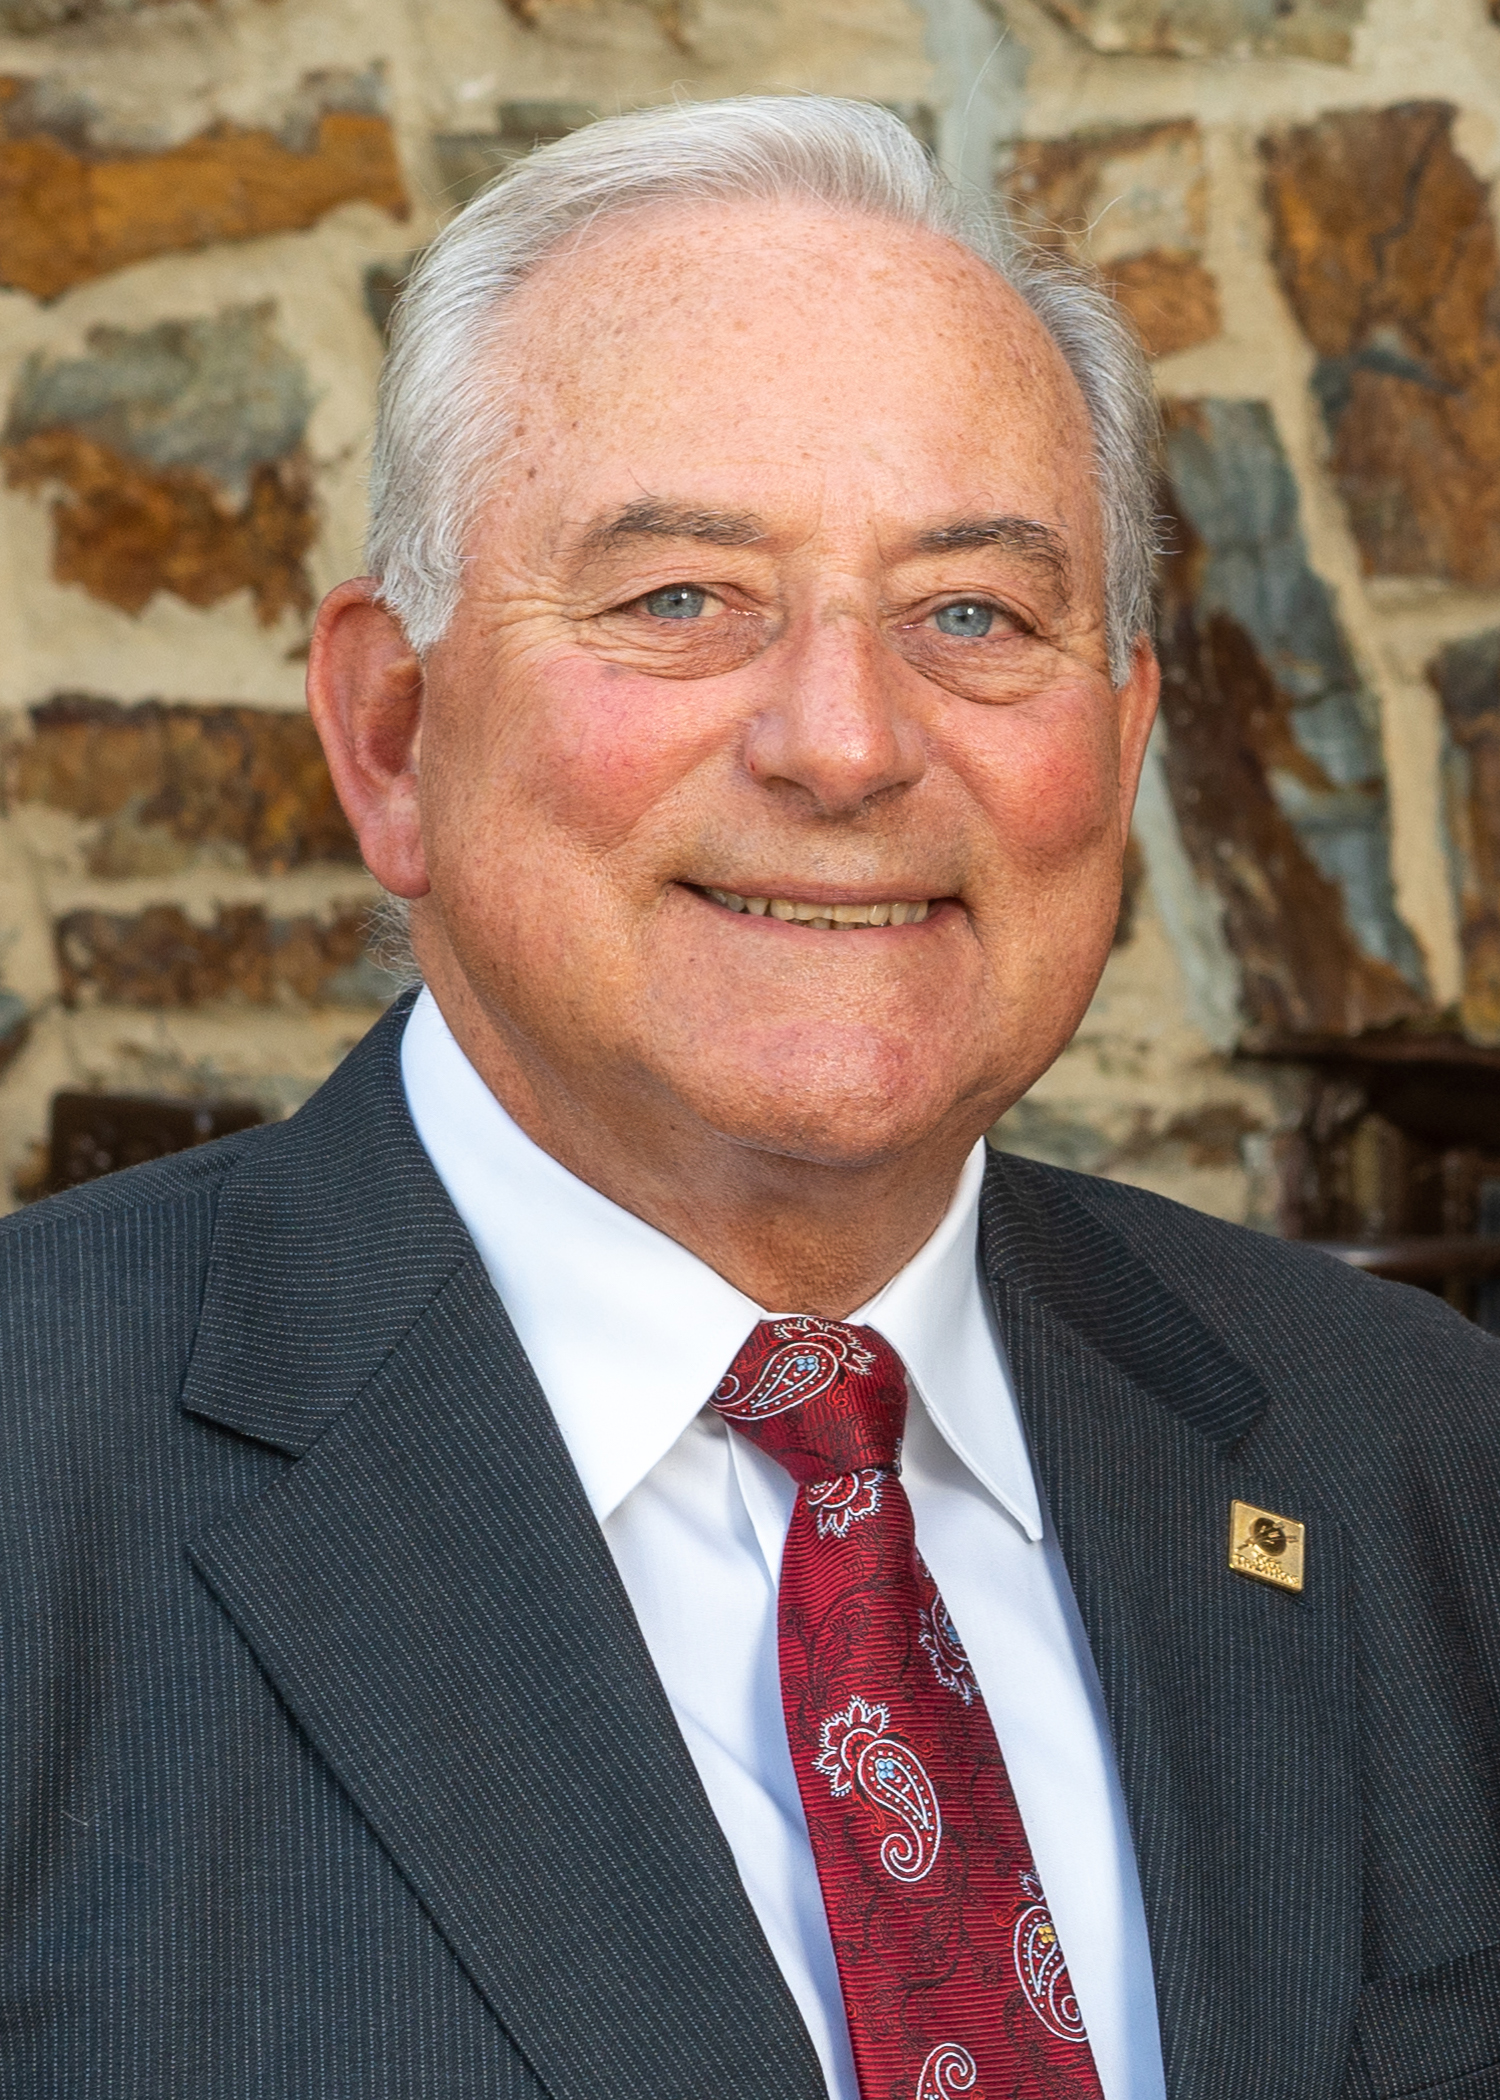 Before founding Traditions Bank, Mike Kochenour began his 45-year career with National Central Bank and successors—Hamilton, CoreStates, and First Union—as well as Drovers Bank. His experience in numerous senior leadership positions equipped him to become Founder and Chairman of Traditions Bank and serve as President until 2015 and CEO through 2016.